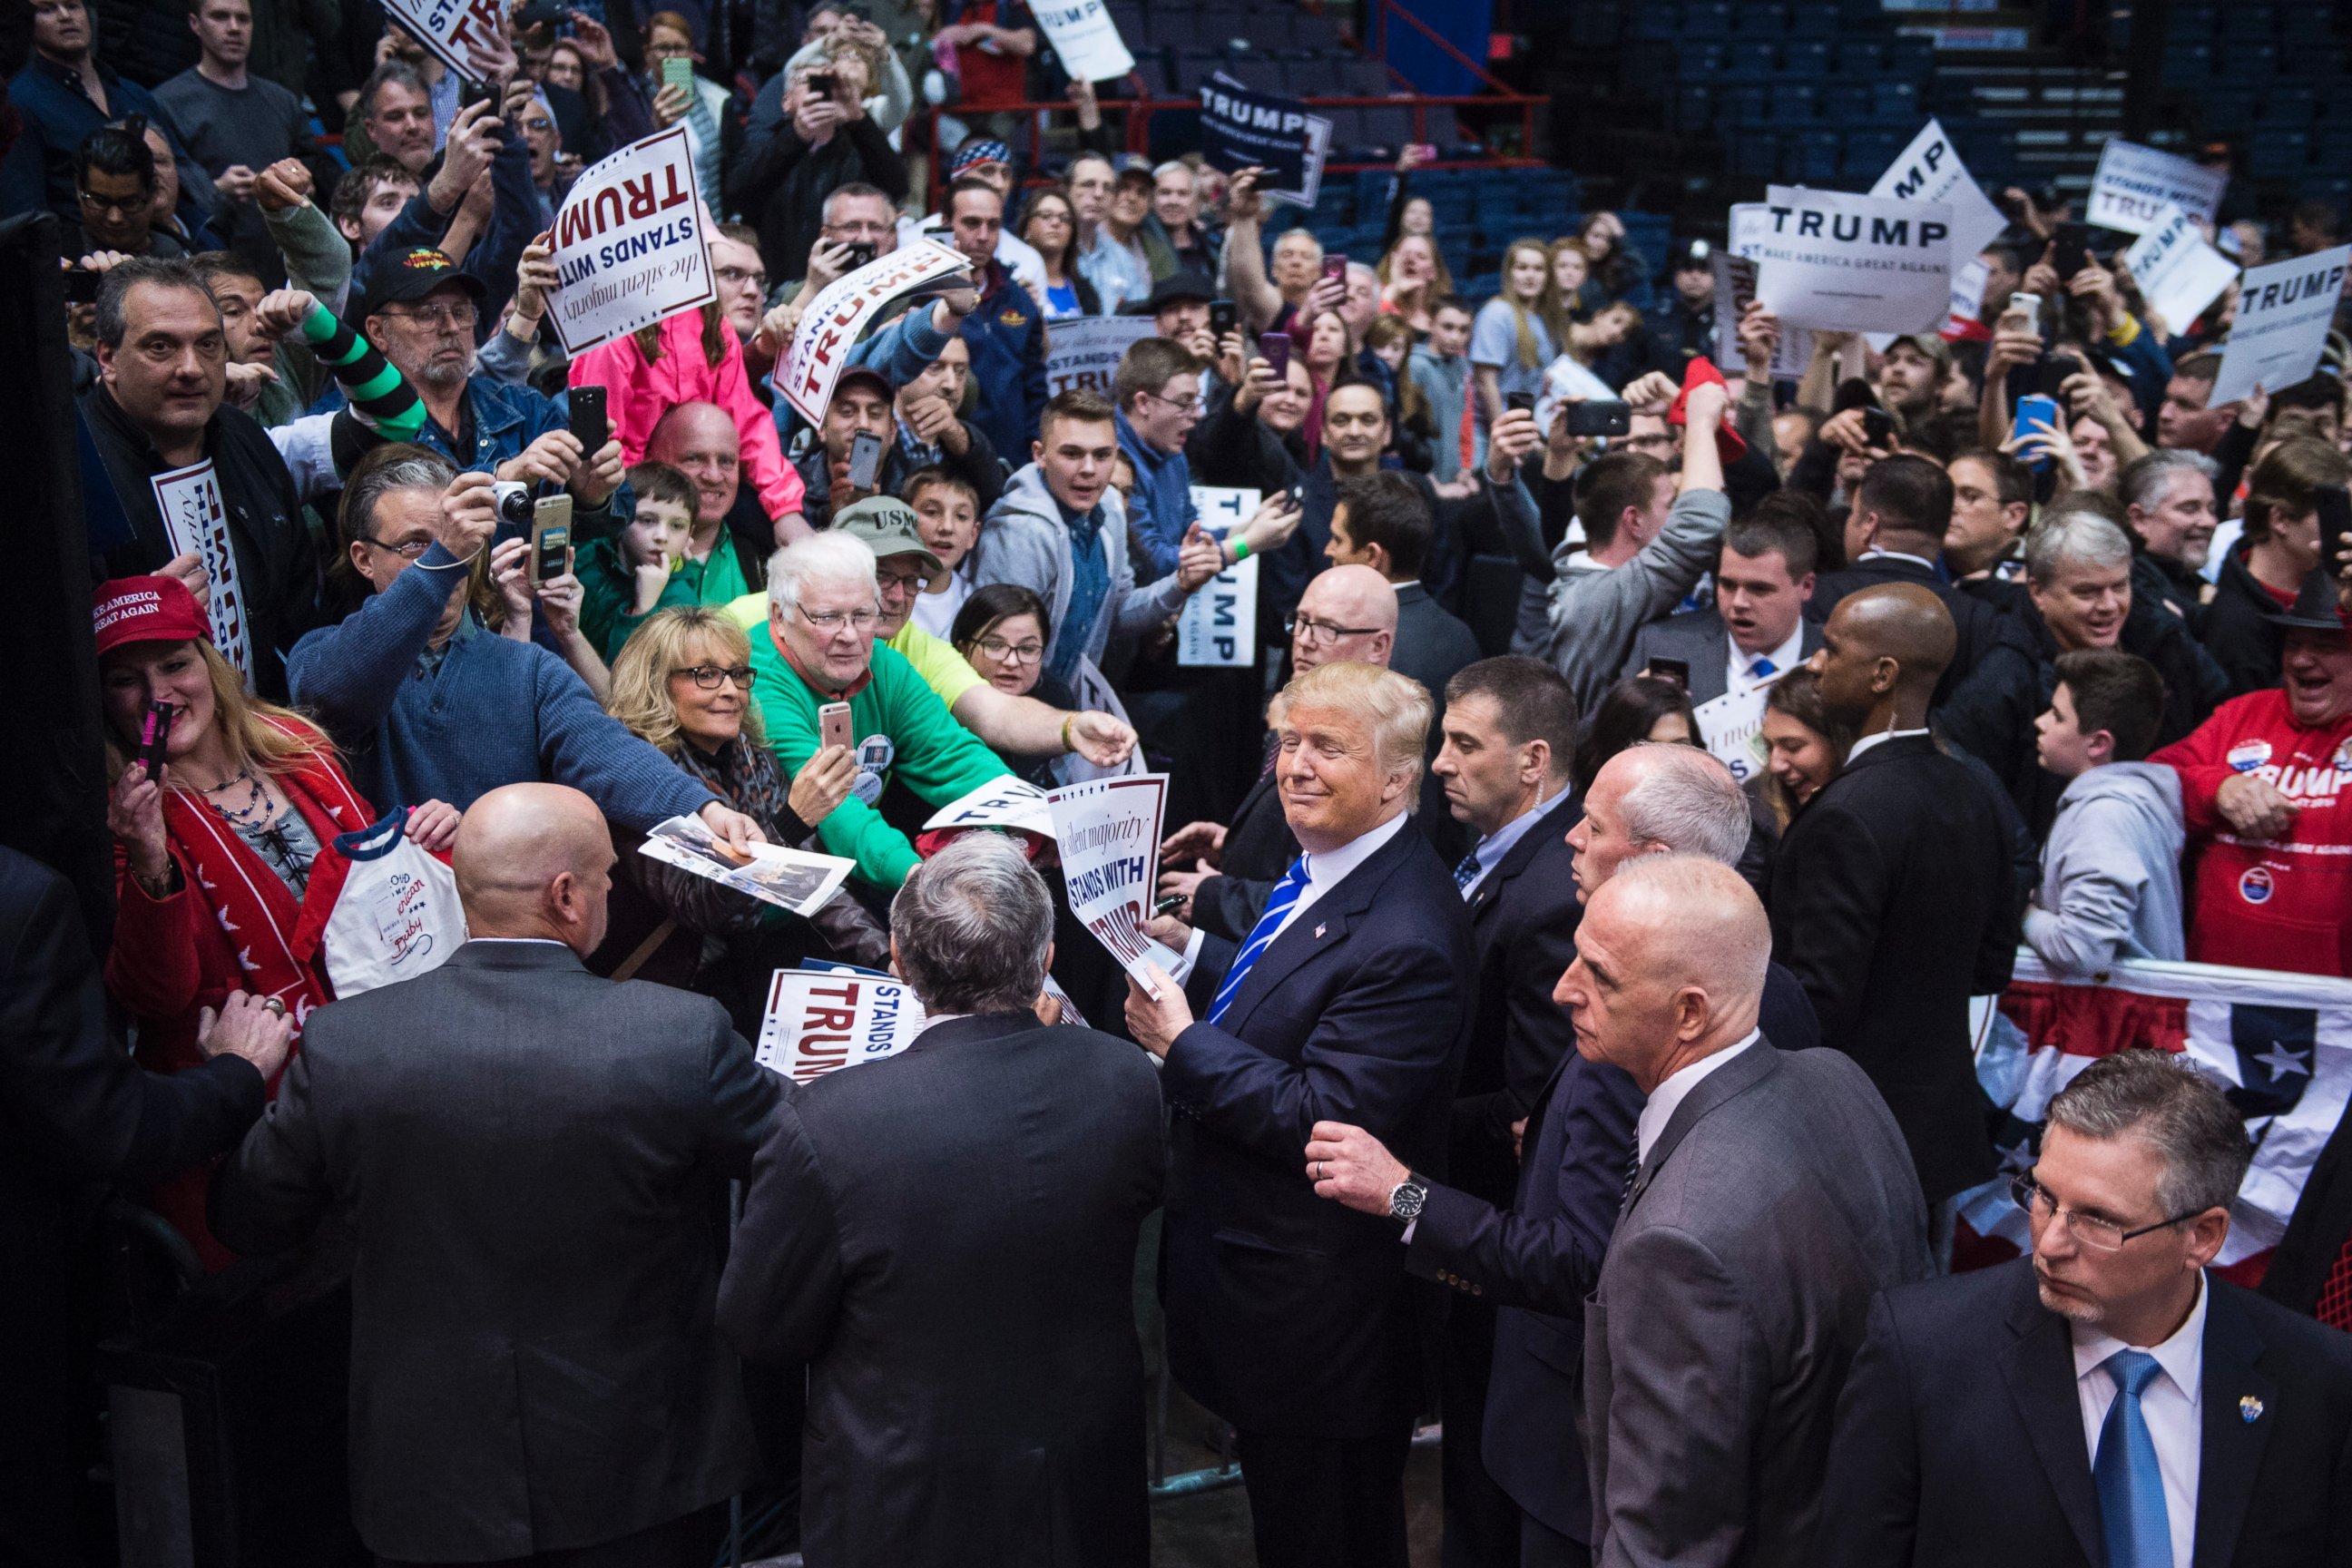 PHOTO: Supporters reach for handshakes, photos, and signatures as Donald Trump greets the crowd after speaking during a campaign event at the Times Union Center in Albany, New York, April 11, 2016. 